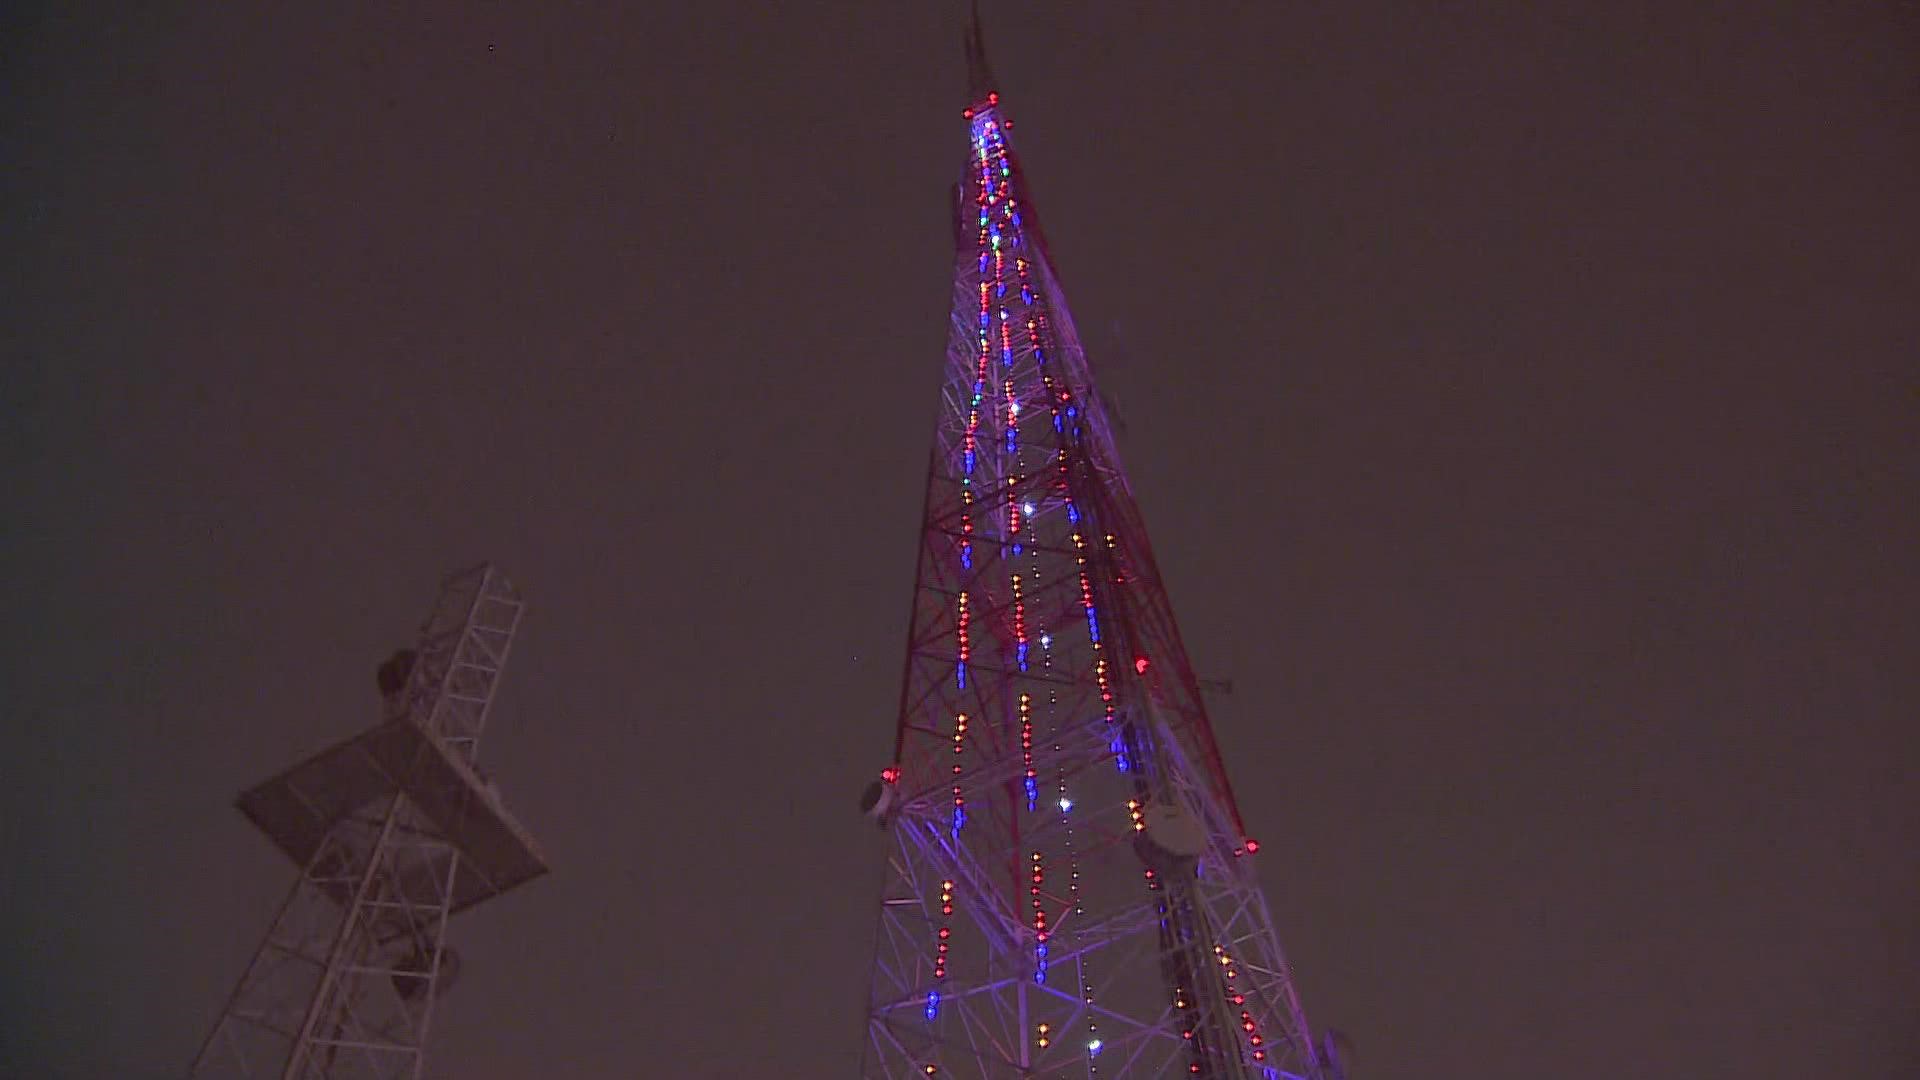 The holiday season is here and for many Seattleites, one of the indications of that is the lights on the KING 5 tower.